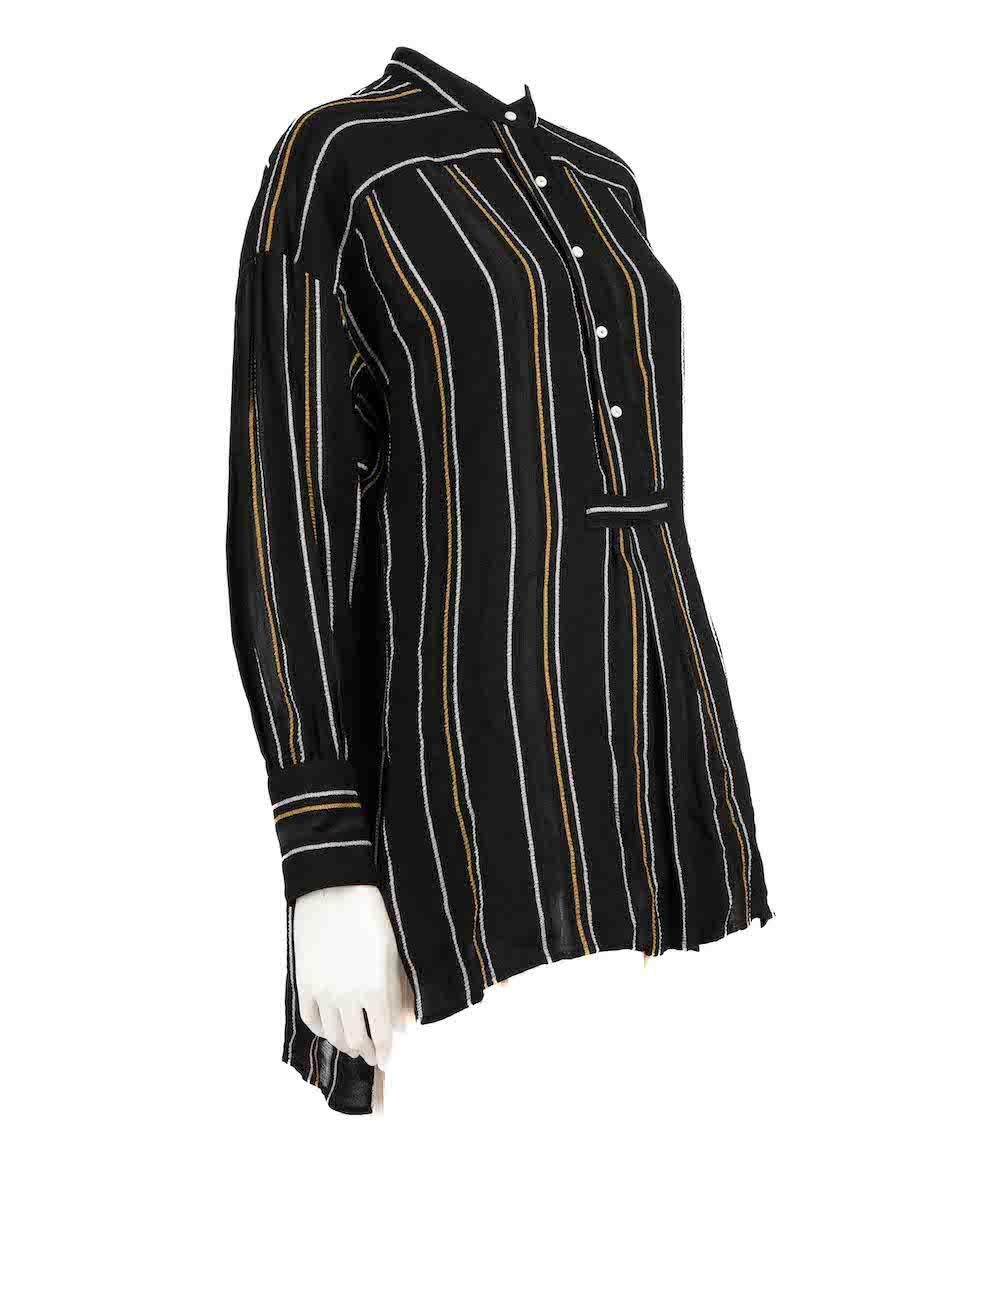 CONDITION is Never worn. No visible wear to blouse is evident on this new Proenza Schouler designer resale item.
 
 
 
 Details
 
 
 Black
 
 Viscose
 
 Tunic blouse
 
 Striped pattern
 
 Button up fastening
 
 Long sleeves
 
 Buttoned cuffs
 
 
 
